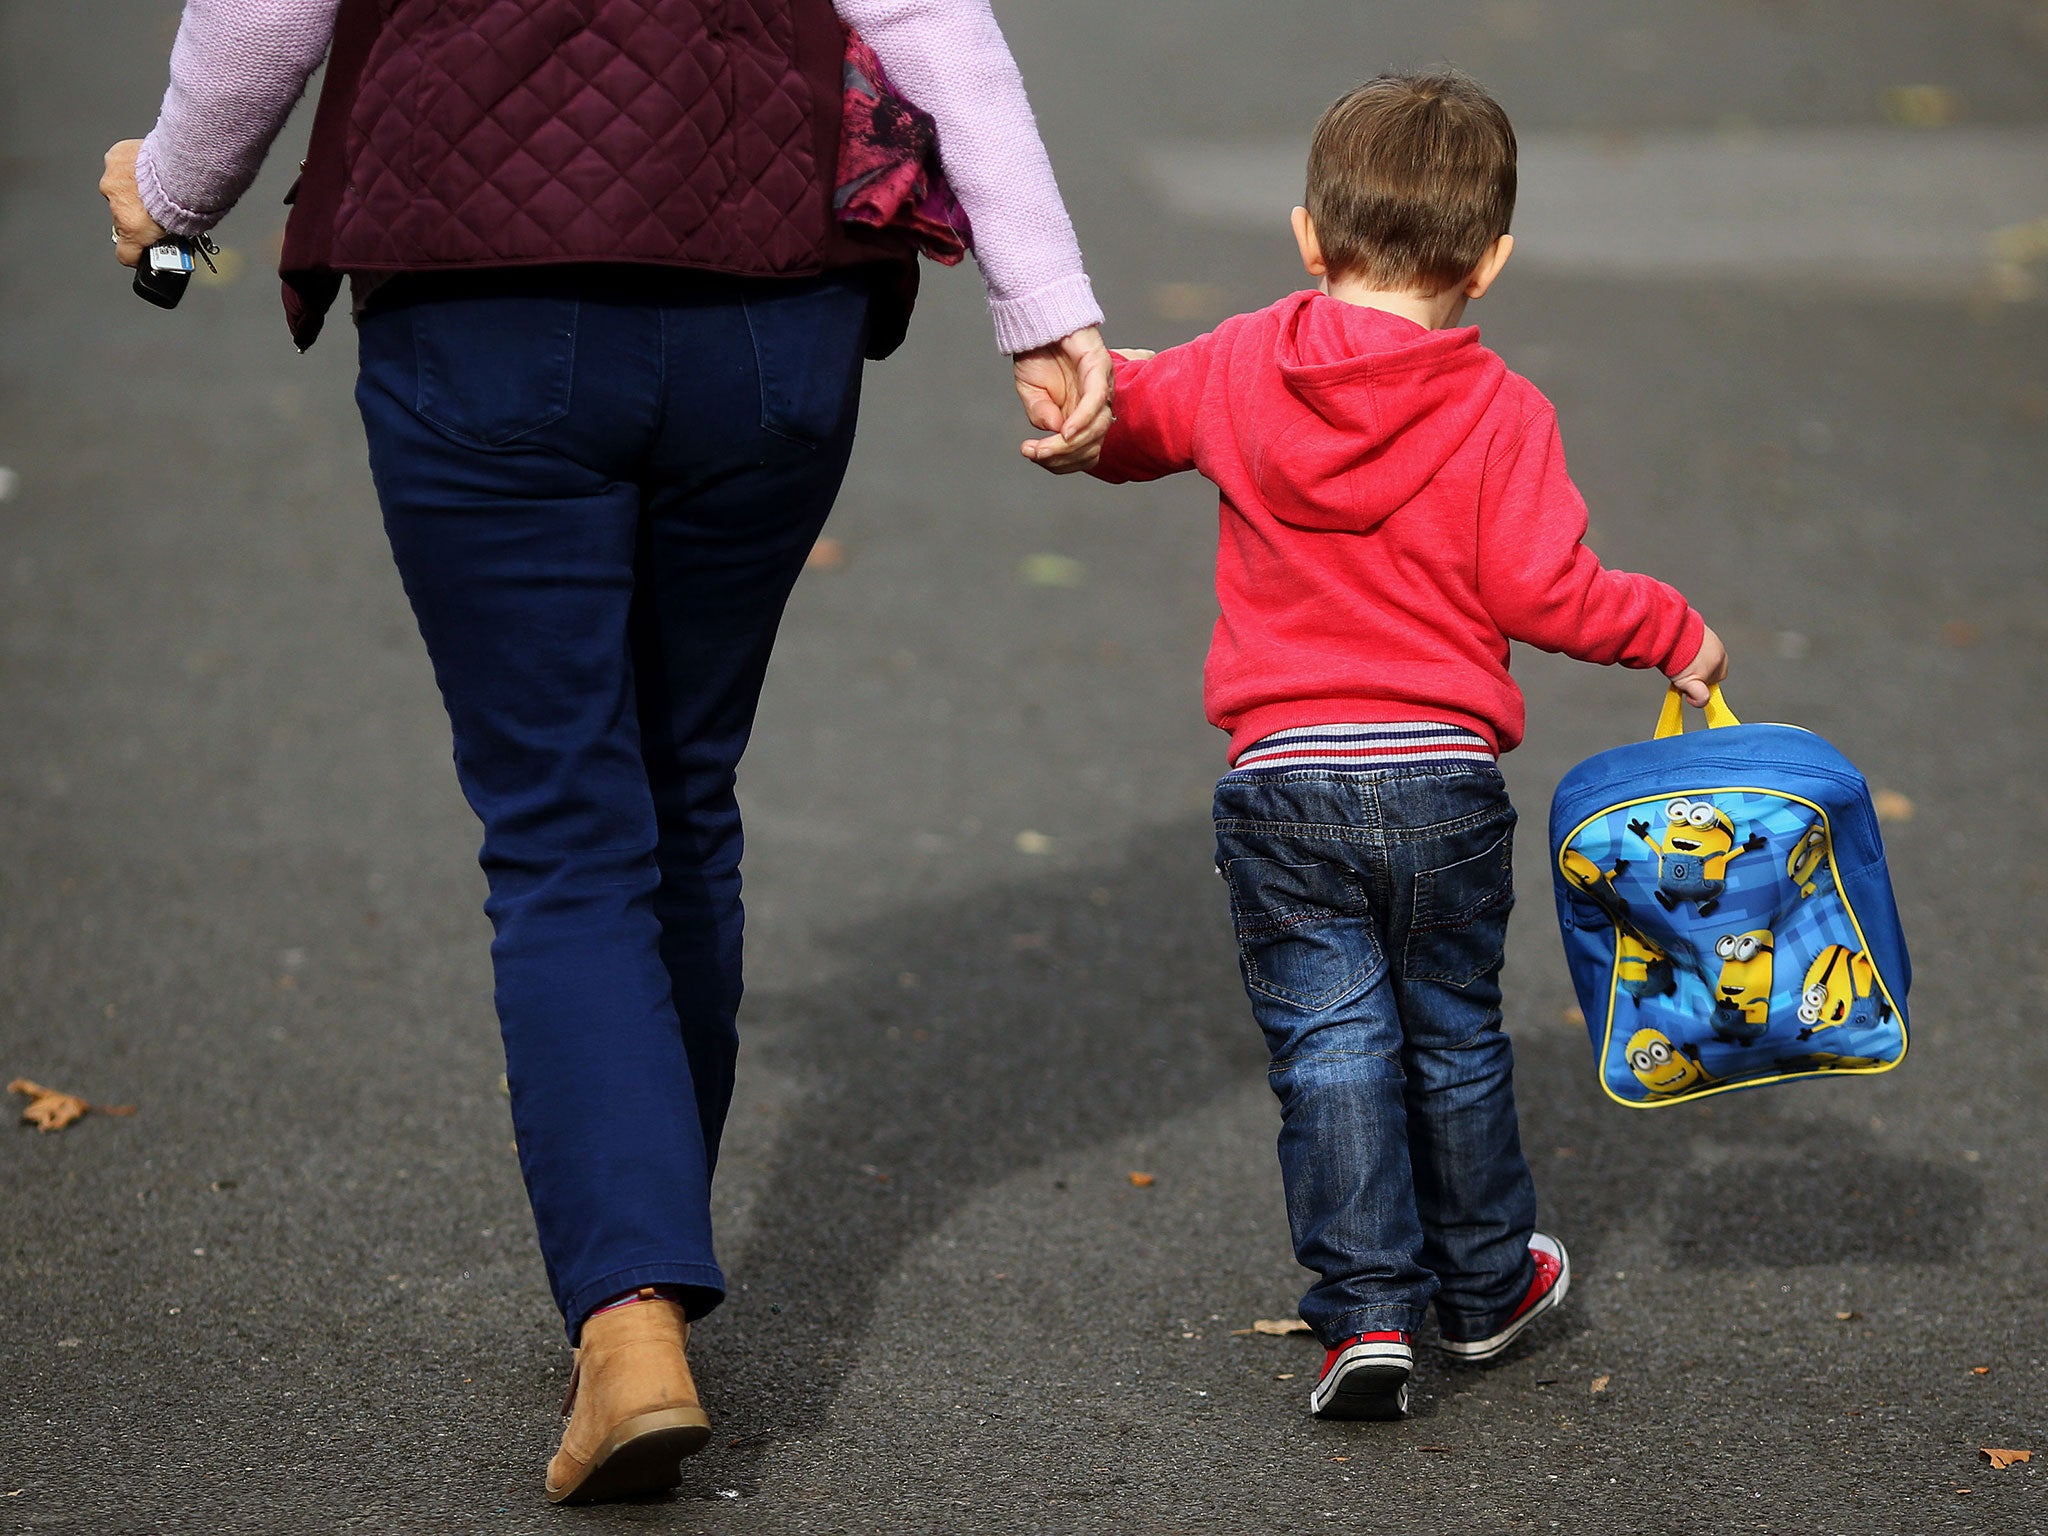 A survey of 1,000 parents revealed that almost half of first-time mums do not understand the government's £6bn programme to help with childcare costs